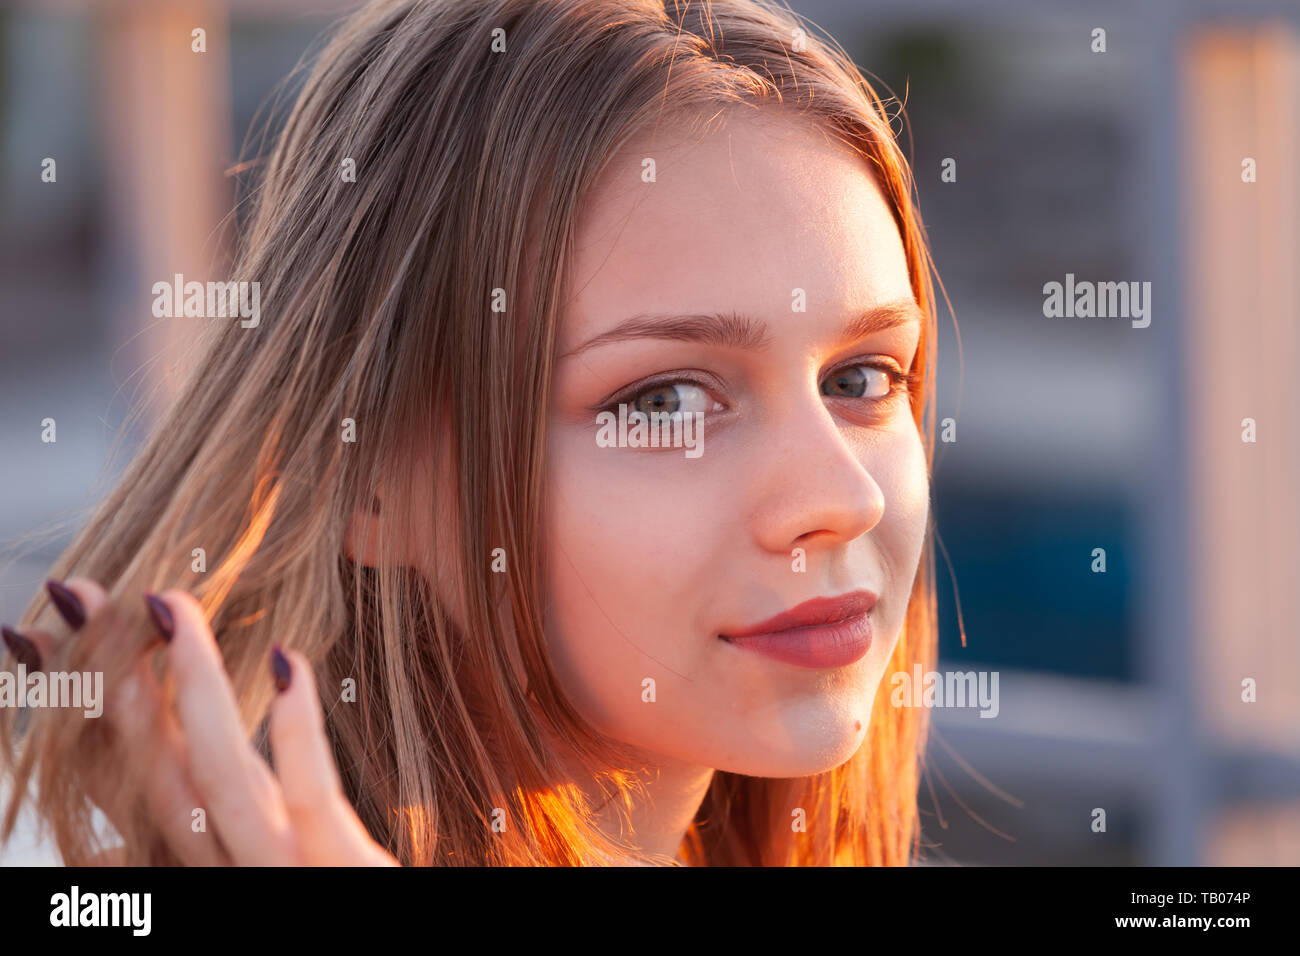 Beautiful blond European teenage girl, close up outdoor portrait with back-lit sunlight Stock Photo